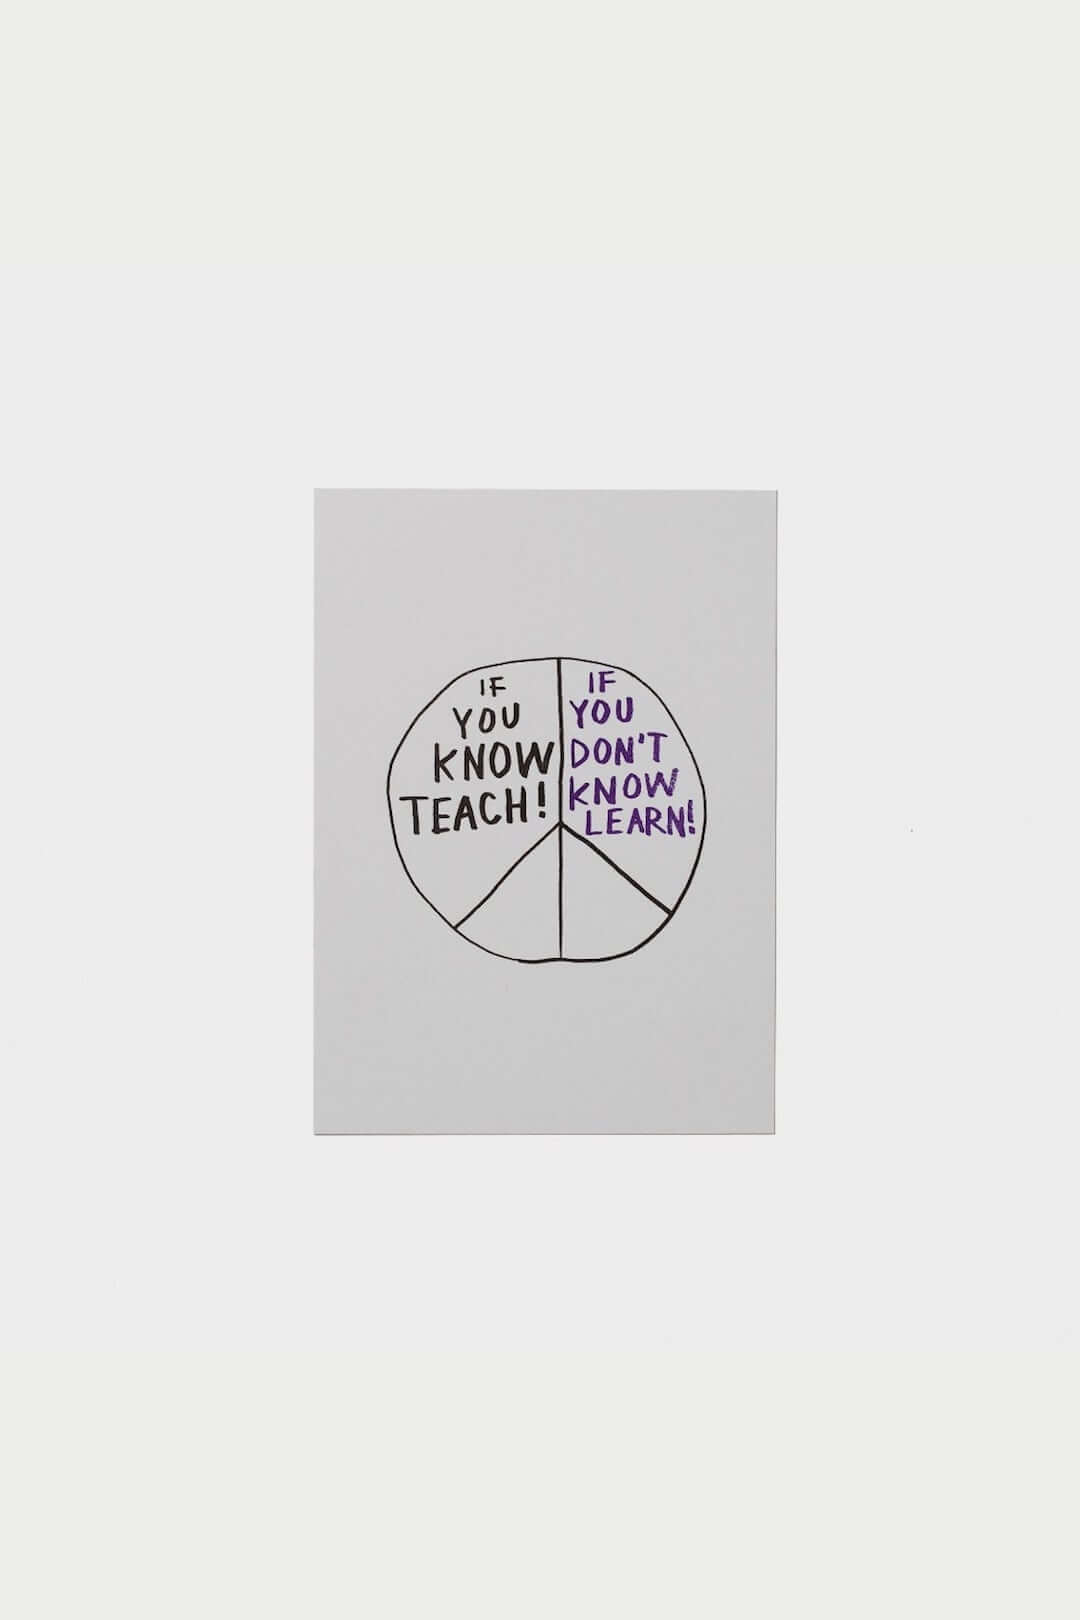 If You Know Teach! If You Don’t Know Learn! Print - Prints - DNO